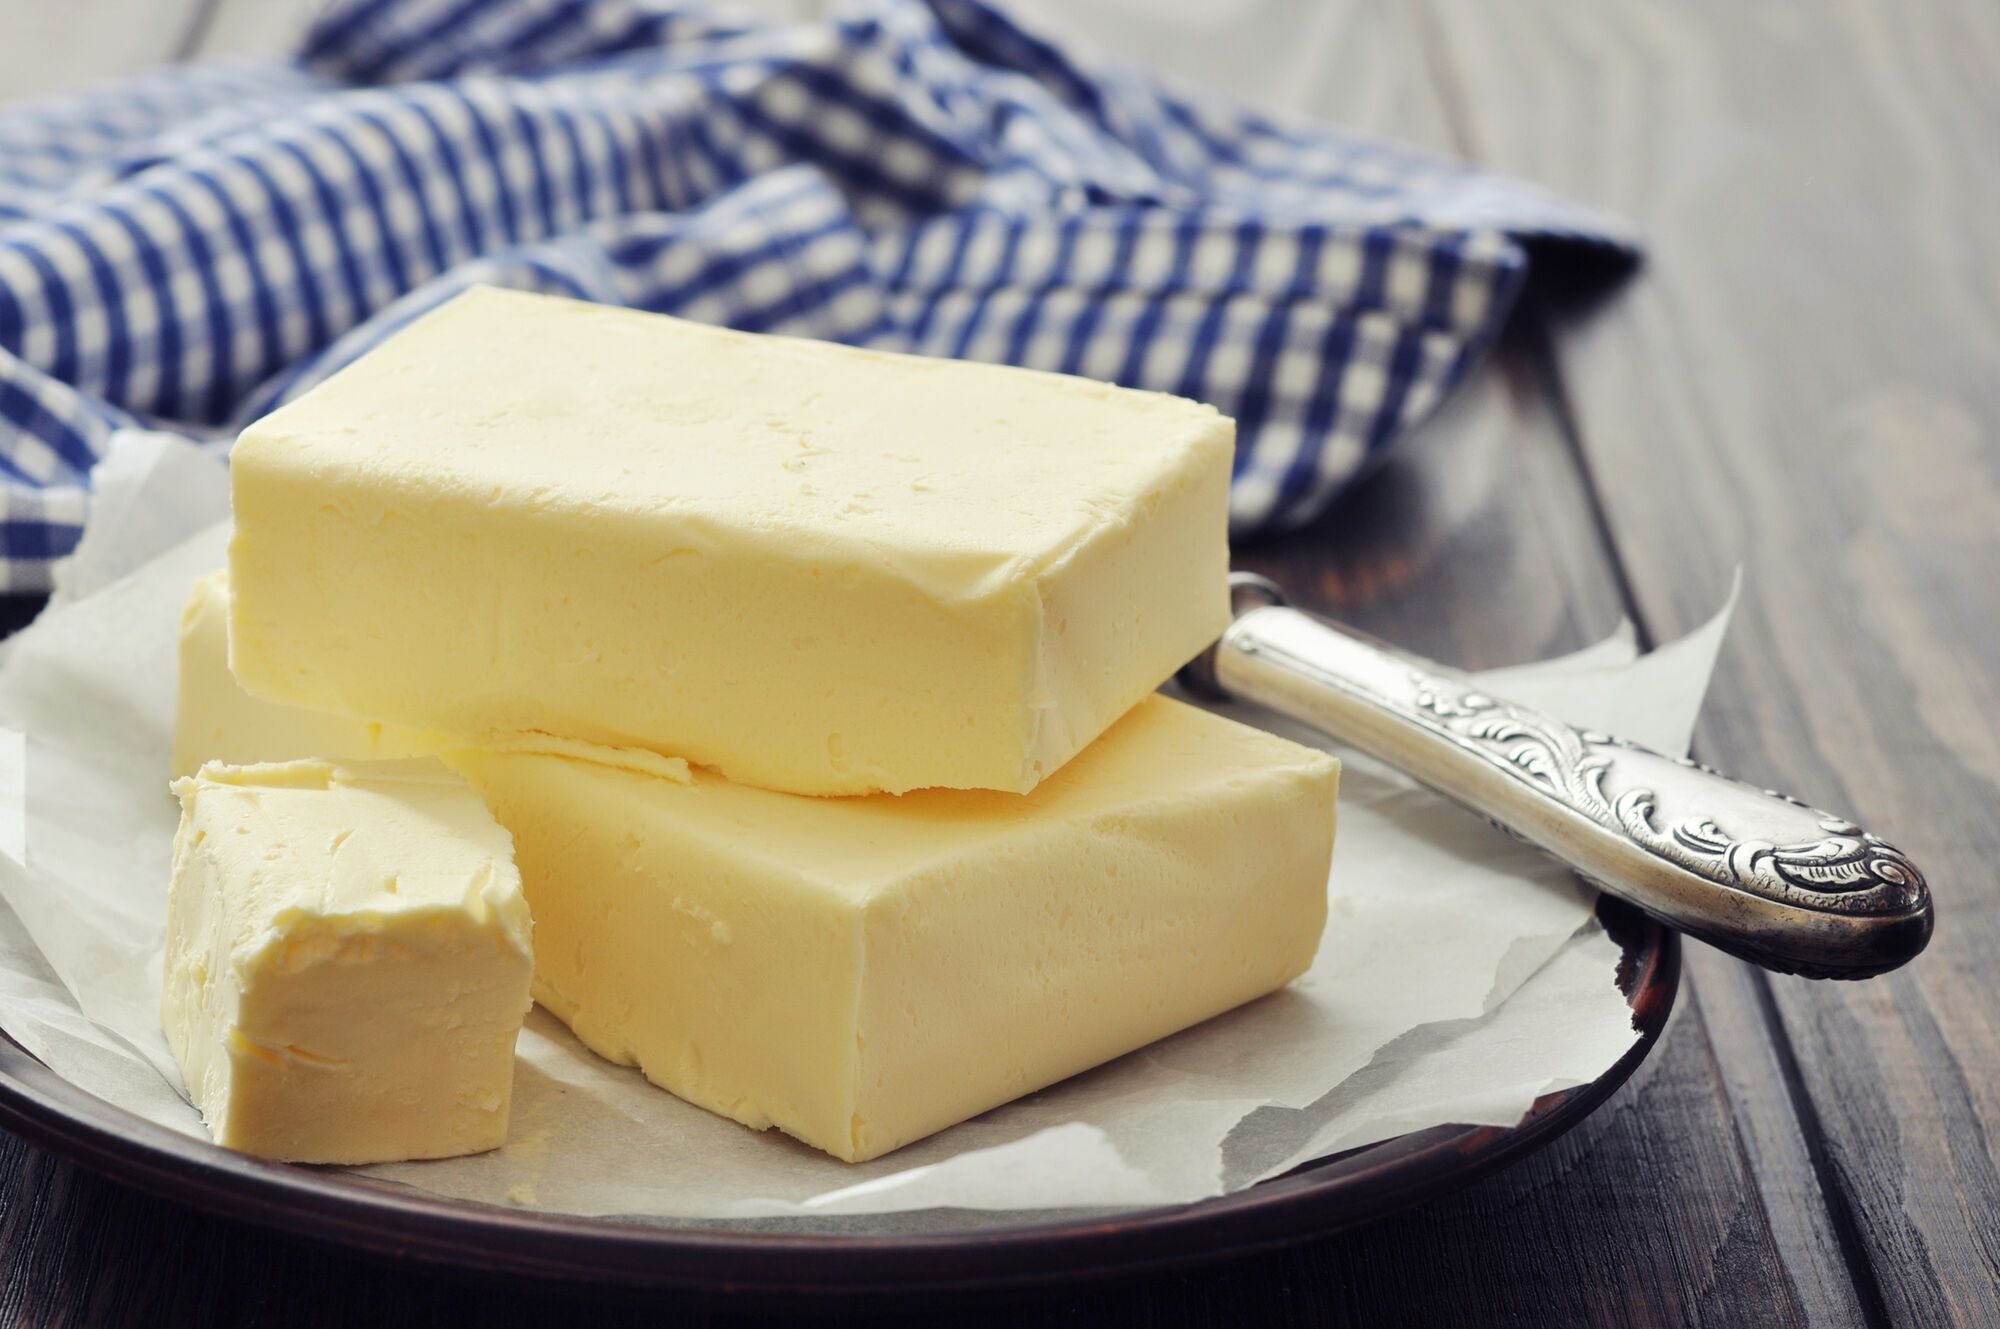 Nutritionist tells about the benefits and risks of butter consumption